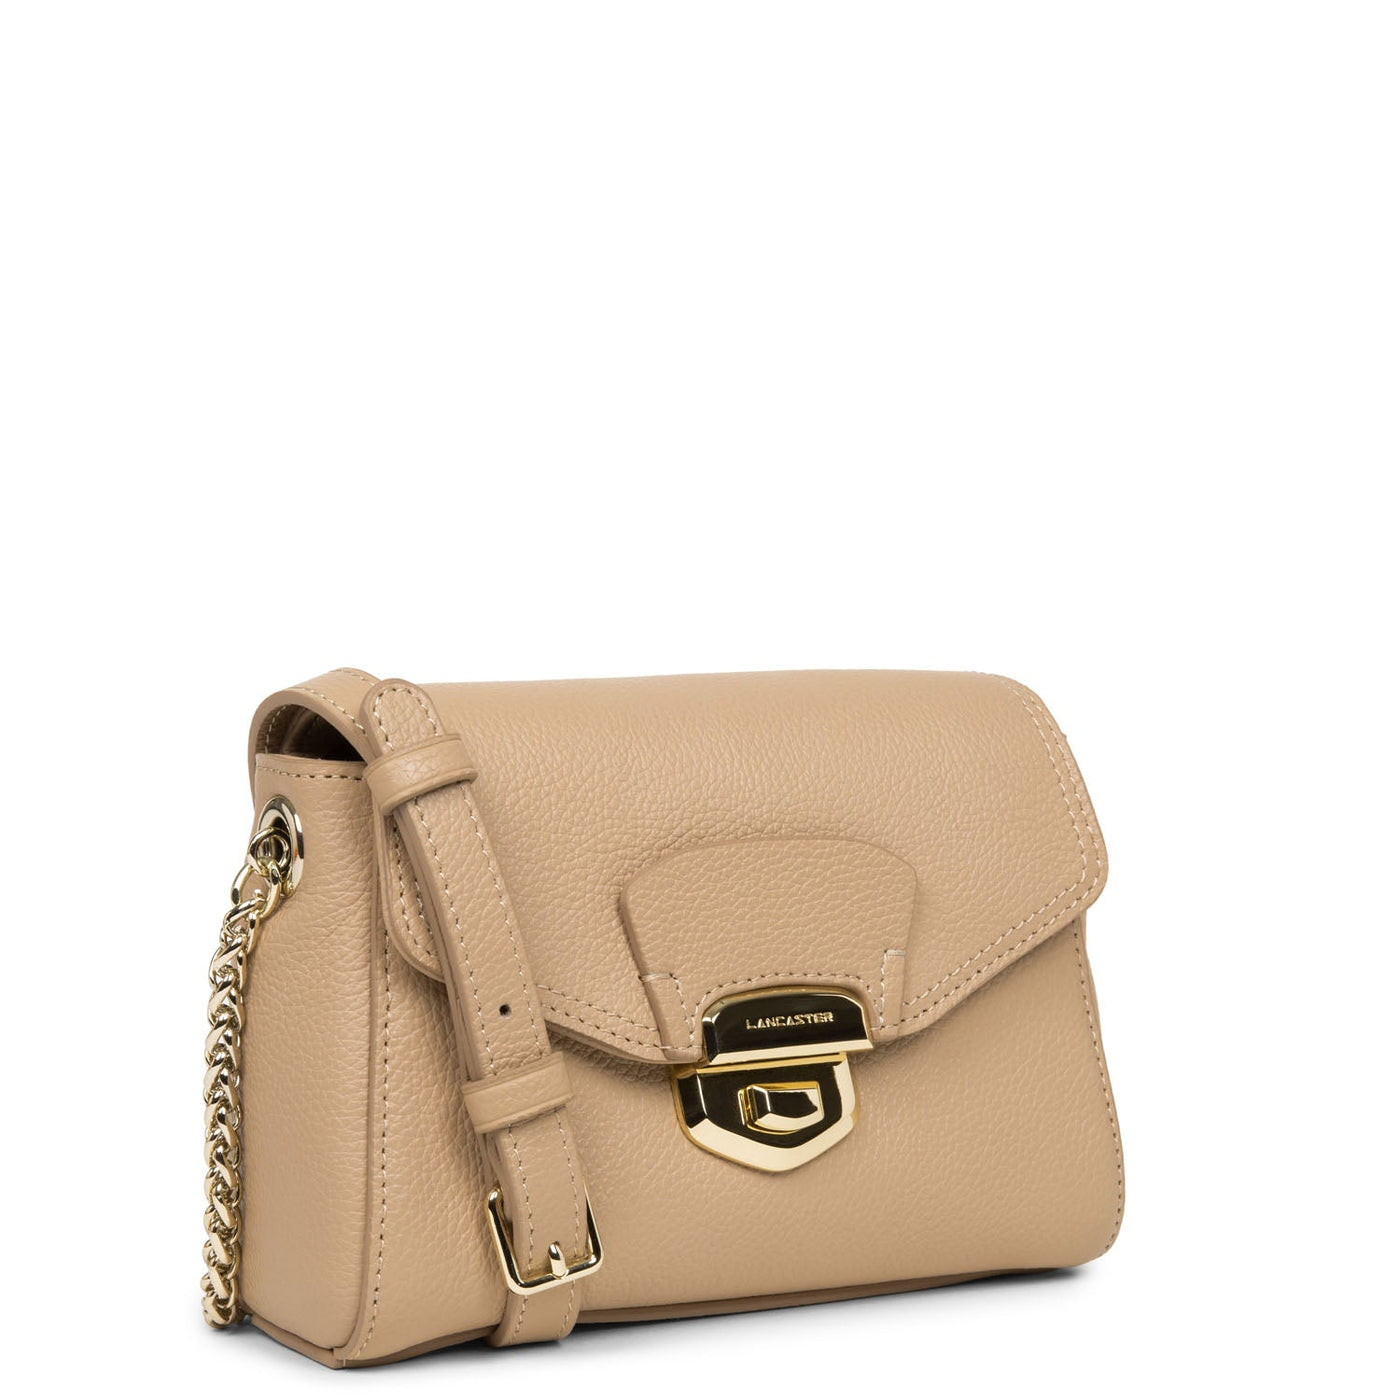 crossbody bag - foulonne milano #couleur_nude